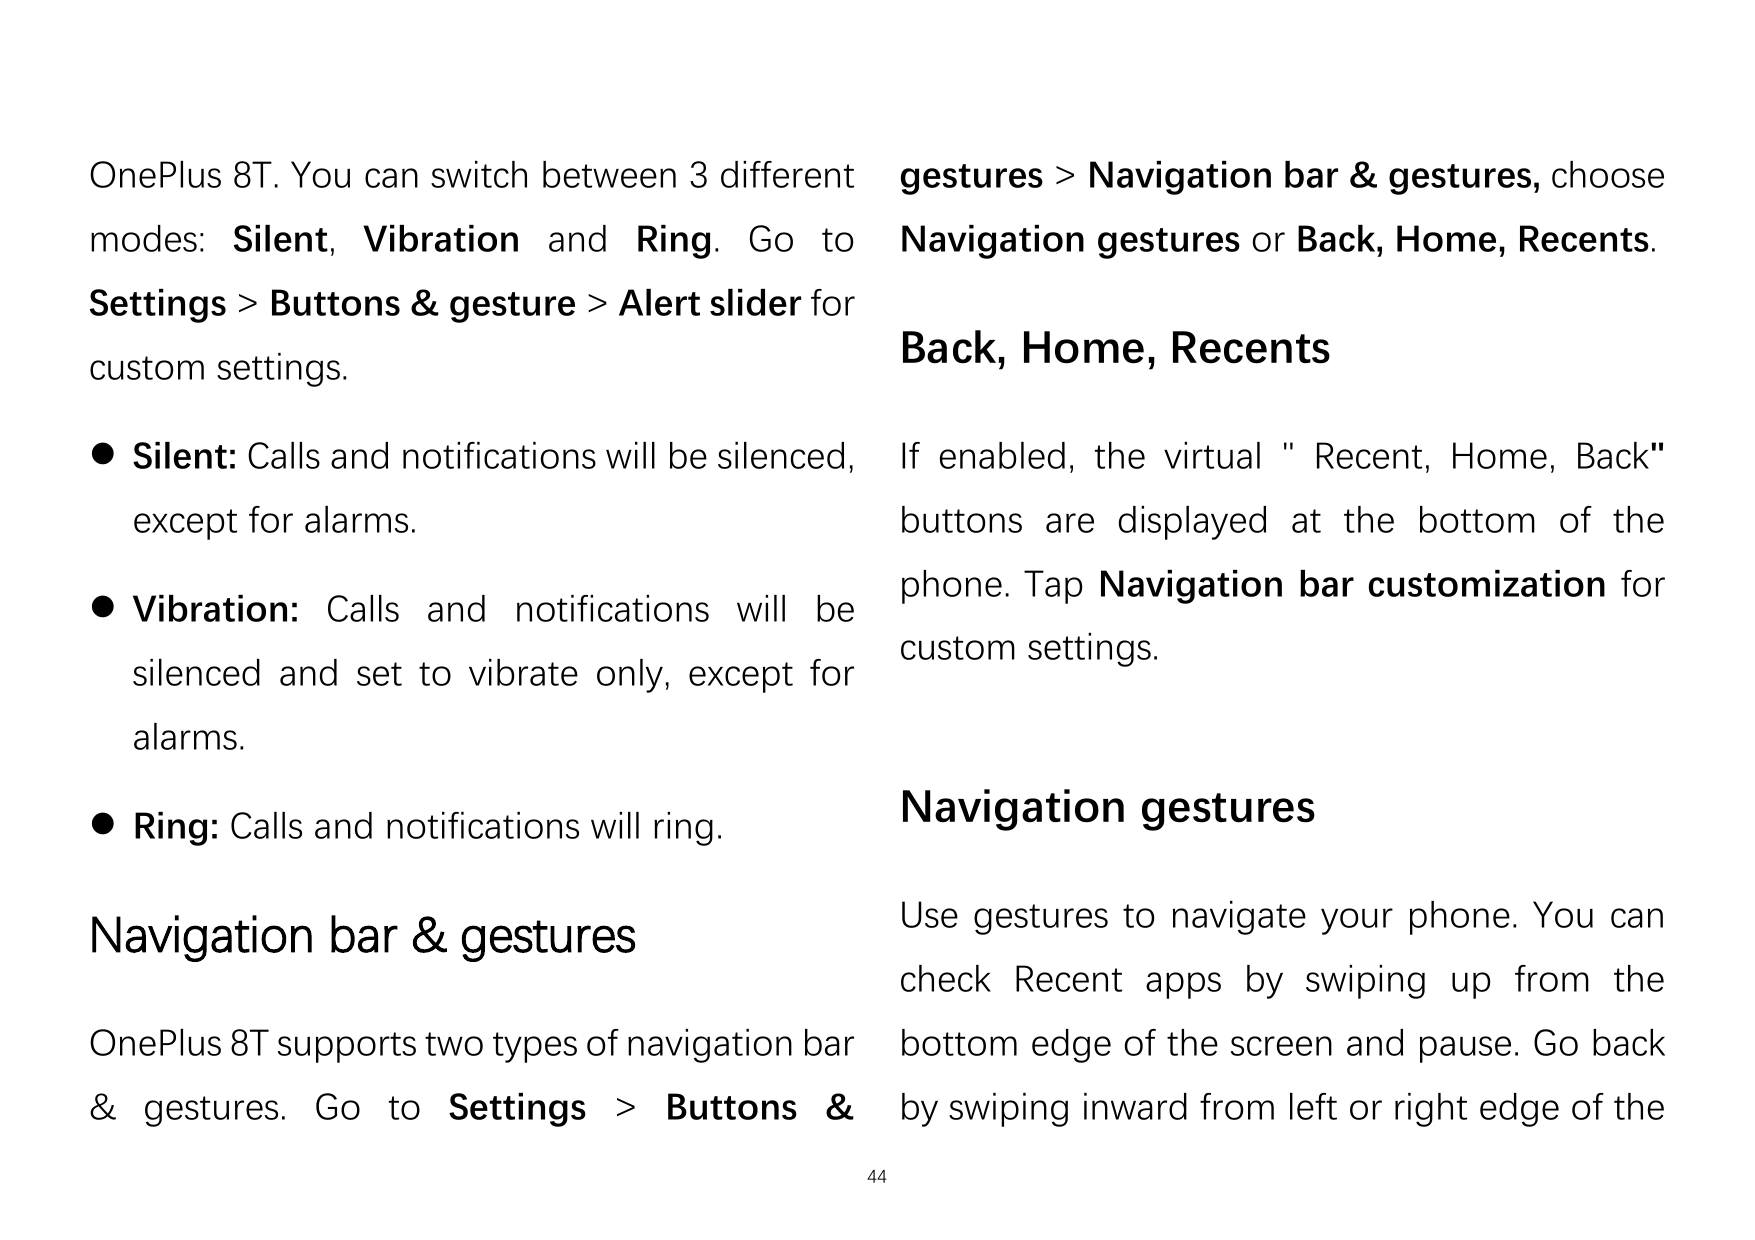 OnePlus 8T. You can switch between 3 differentgestures > Navigation bar & gestures, choosemodes: Silent, Vibration and Ring. Go 